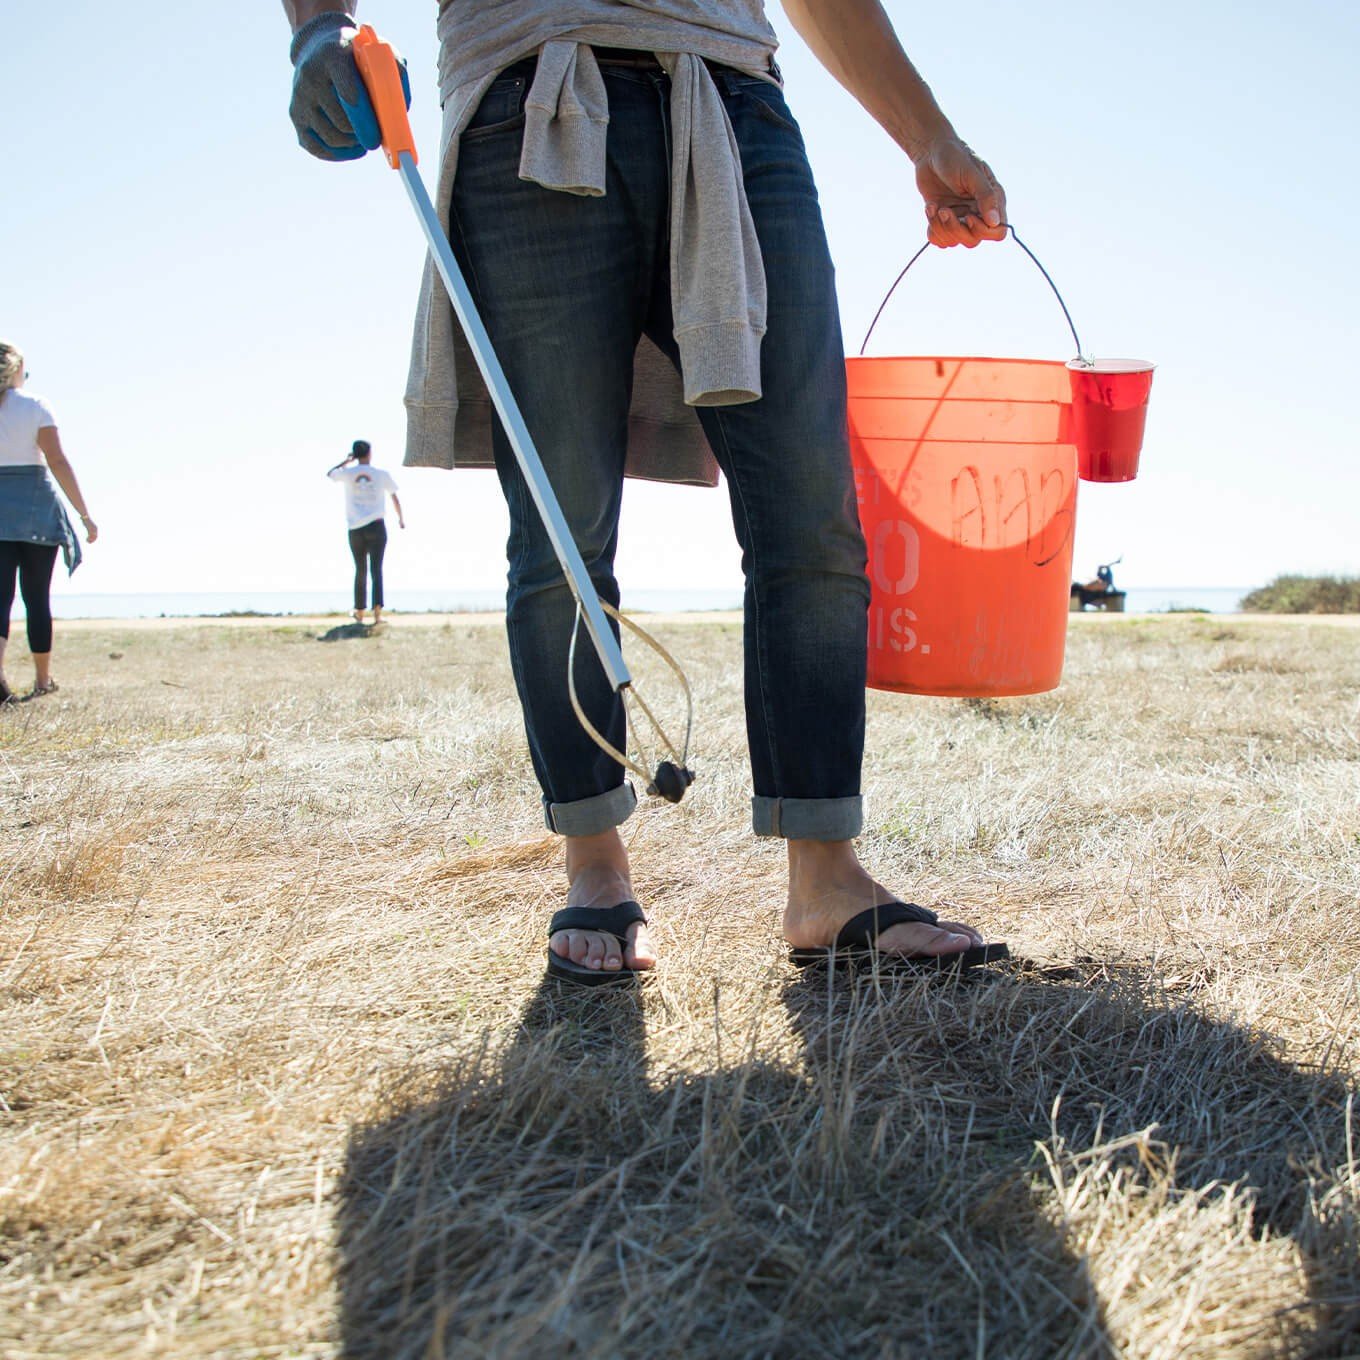 Volunteer uses a grabber to pick up trash at a cleanup